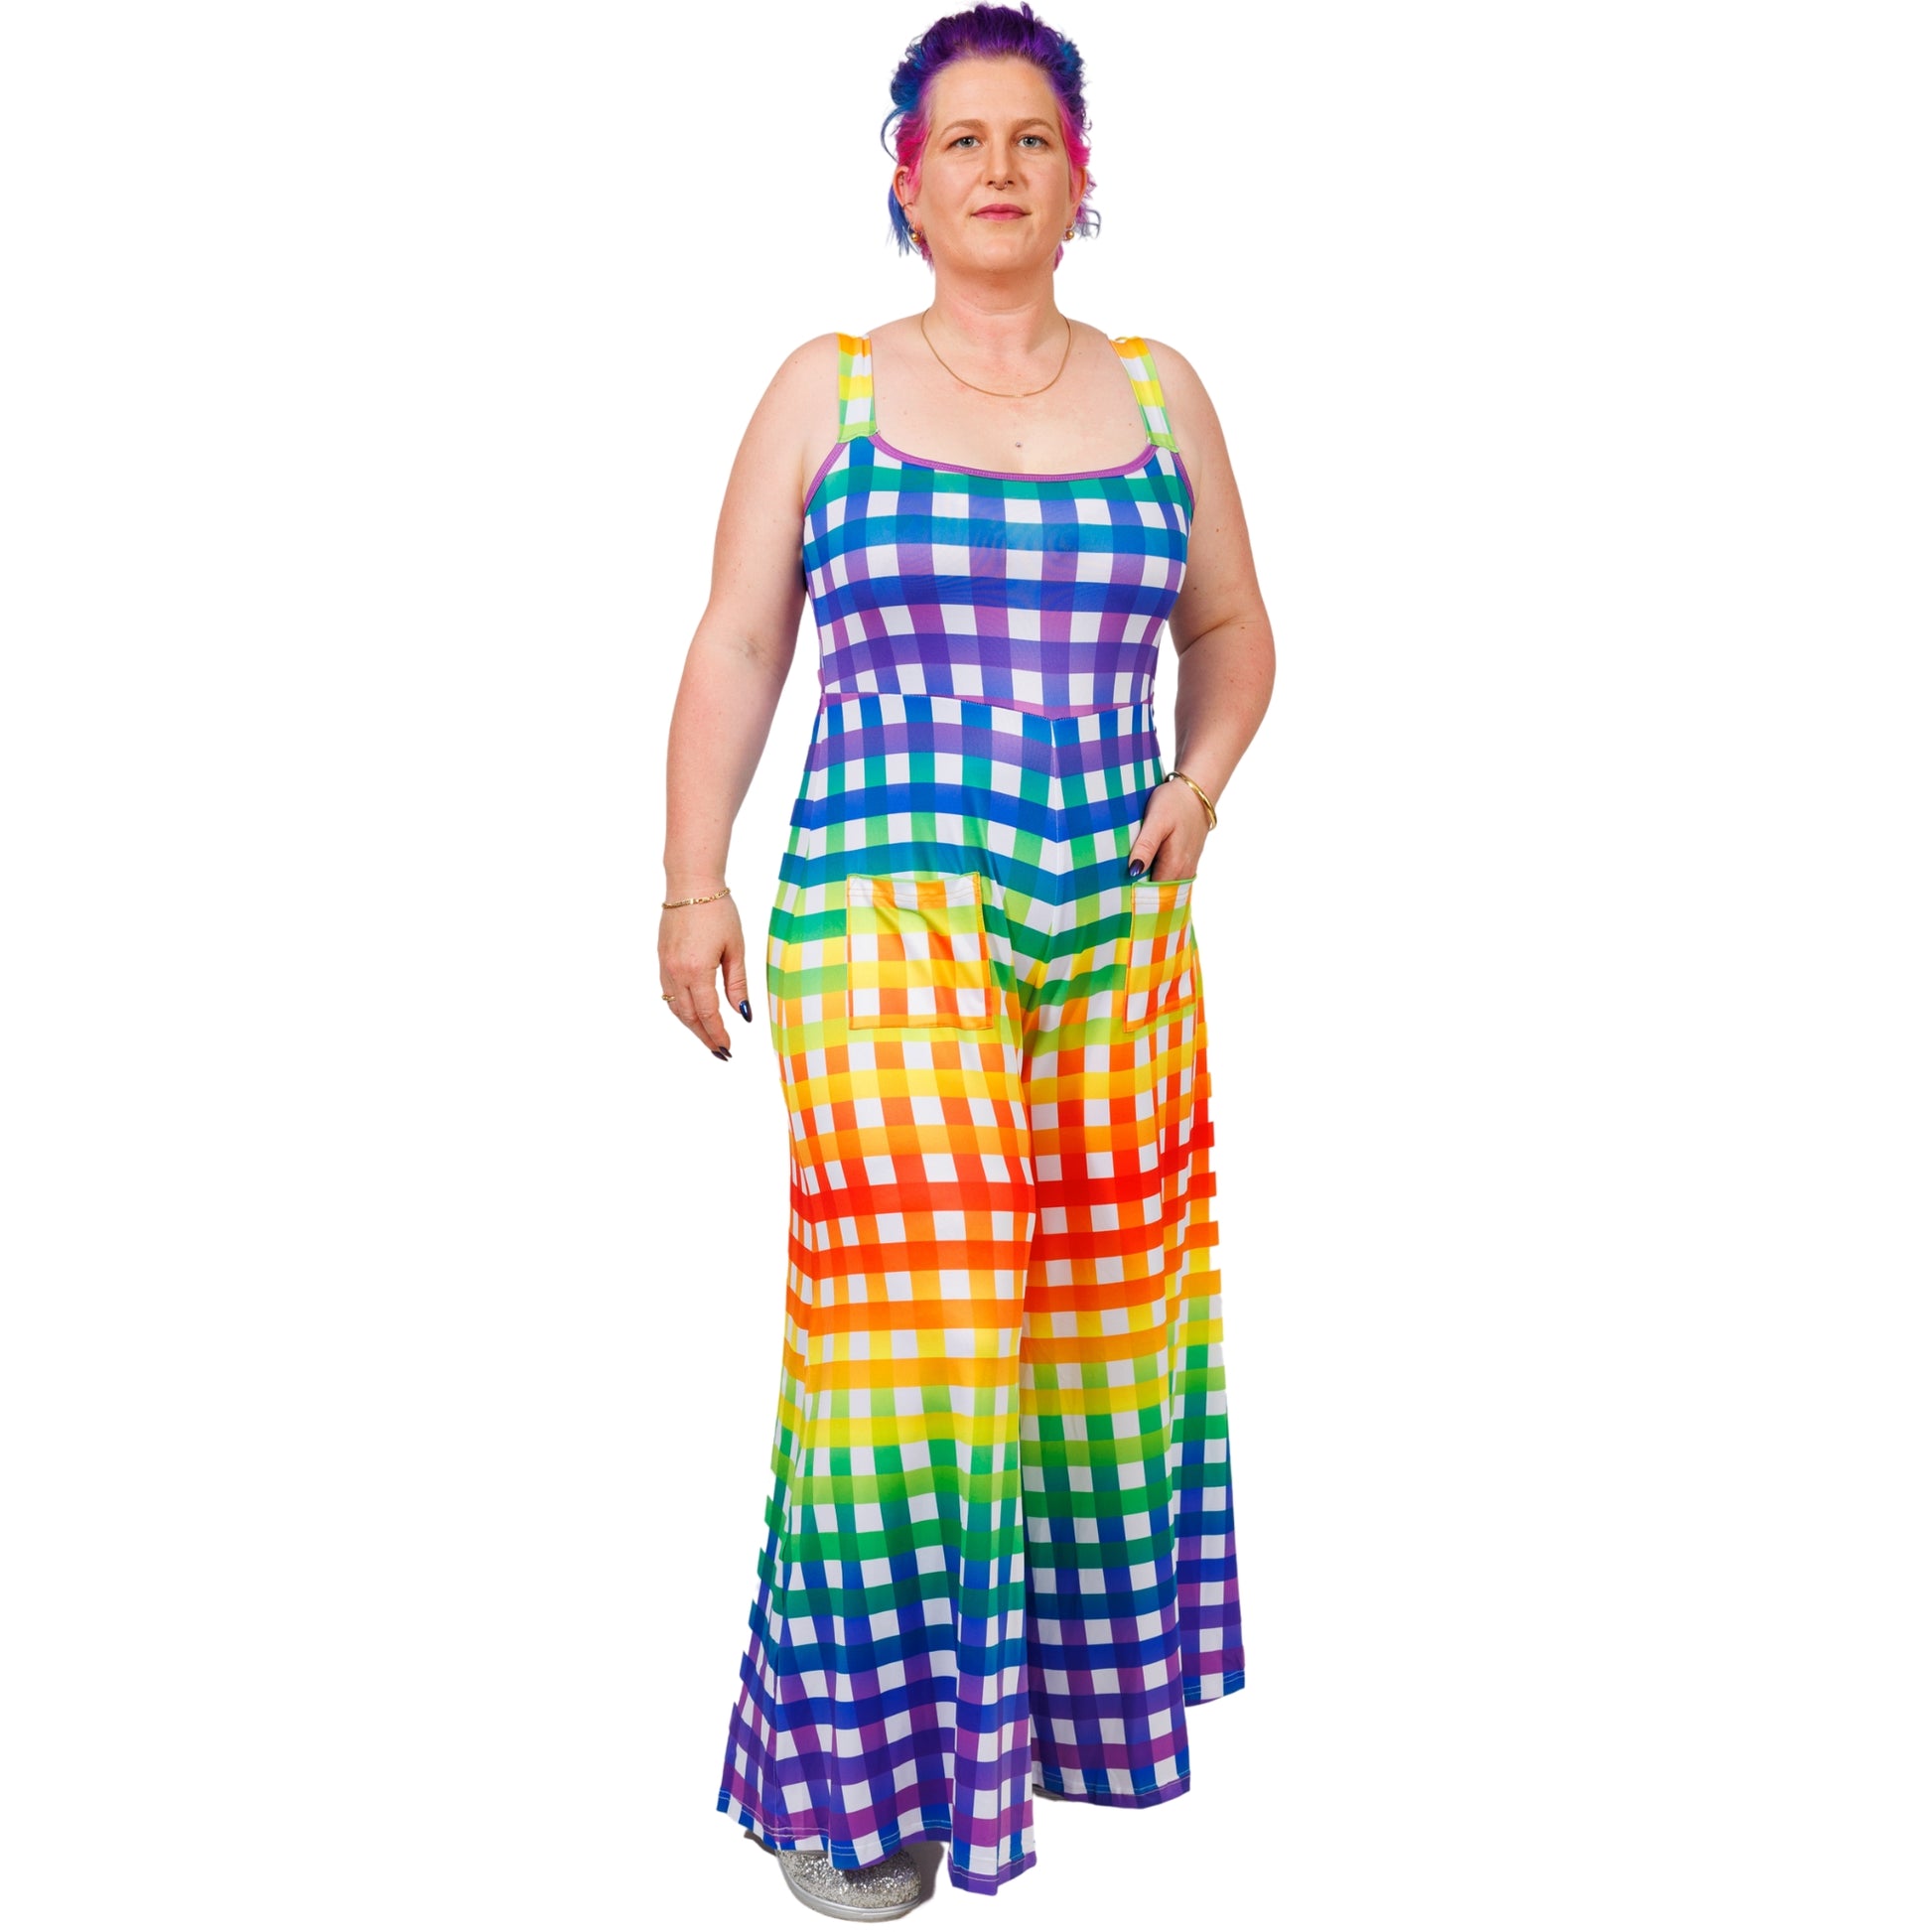 Rainbow Gingham Jumpsuit by RainbowsAndFairies.com.au (Check - Pride - Overalls - Wide Leg Pants - Kitsch - Rockabilly) - SKU: CL_JUMPS_GINGH_RBW - Pic-02